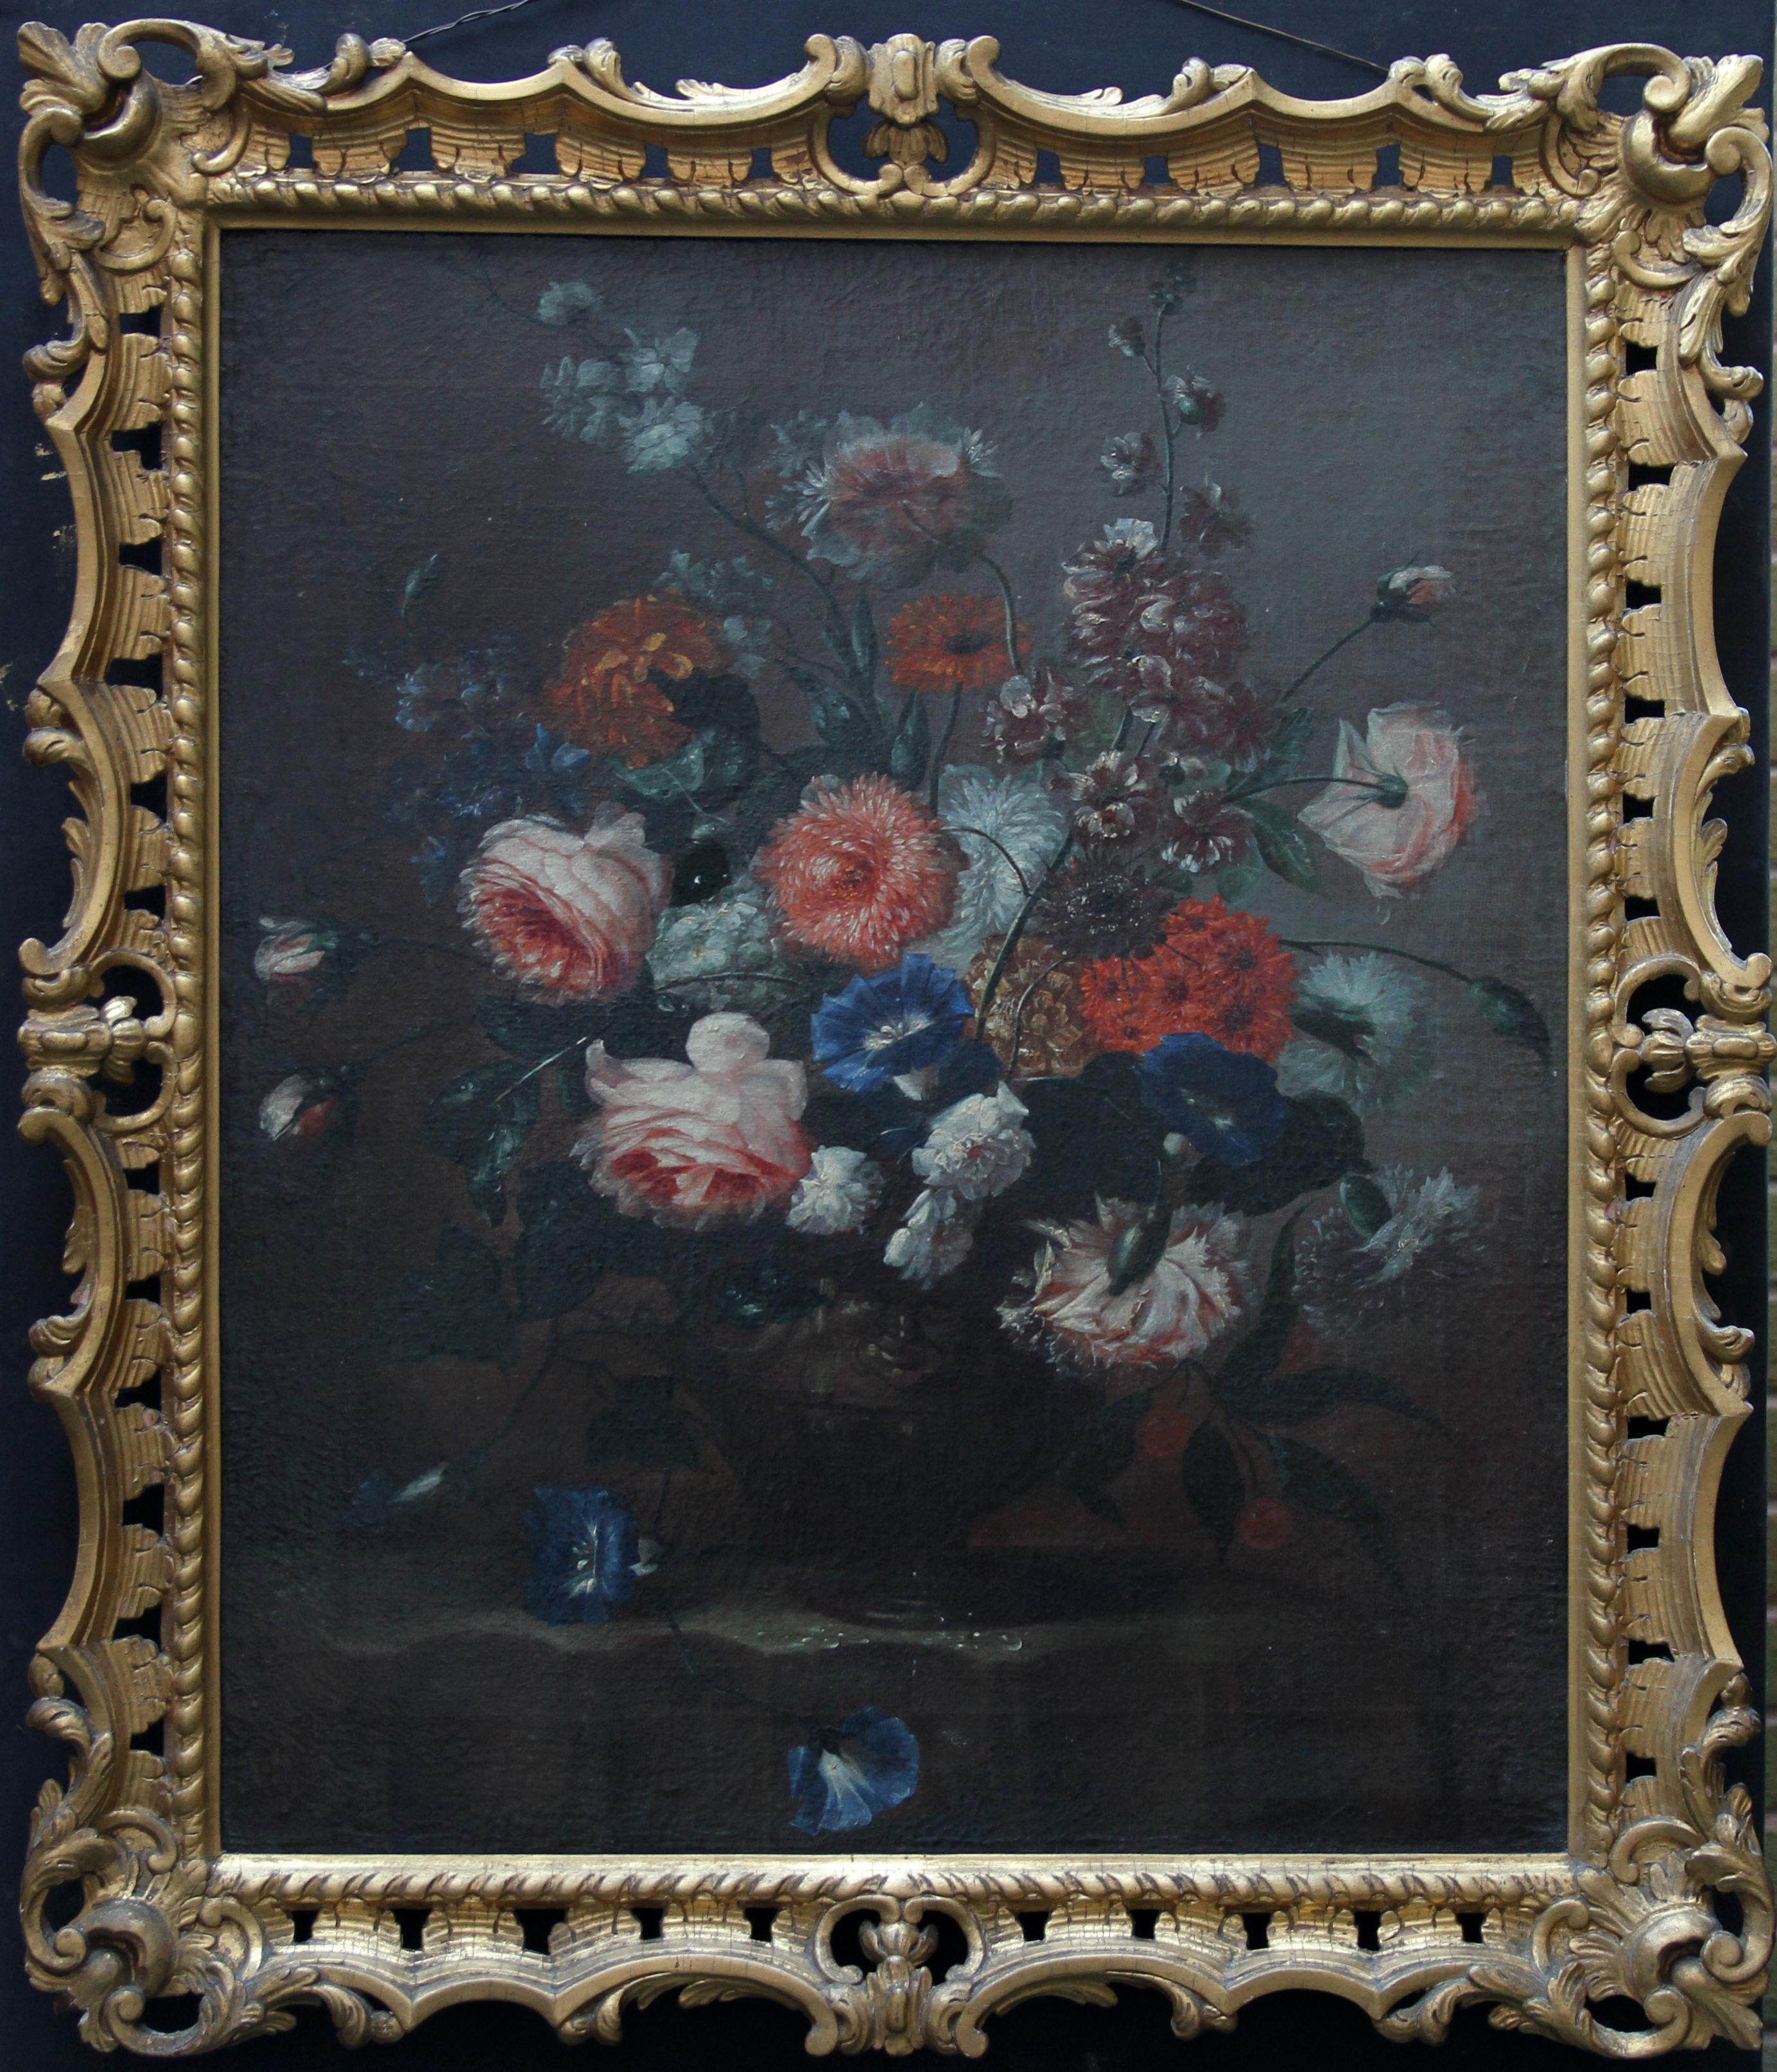 A fine Dutch Old Master floral still life. Painted circa 1700, this oil on canvas depicts peonies roses, convolvulus and other flowers in a bronze vase. A superb 17/18th century Old Master in a fine 18th century carved gilt rococo frame. It is